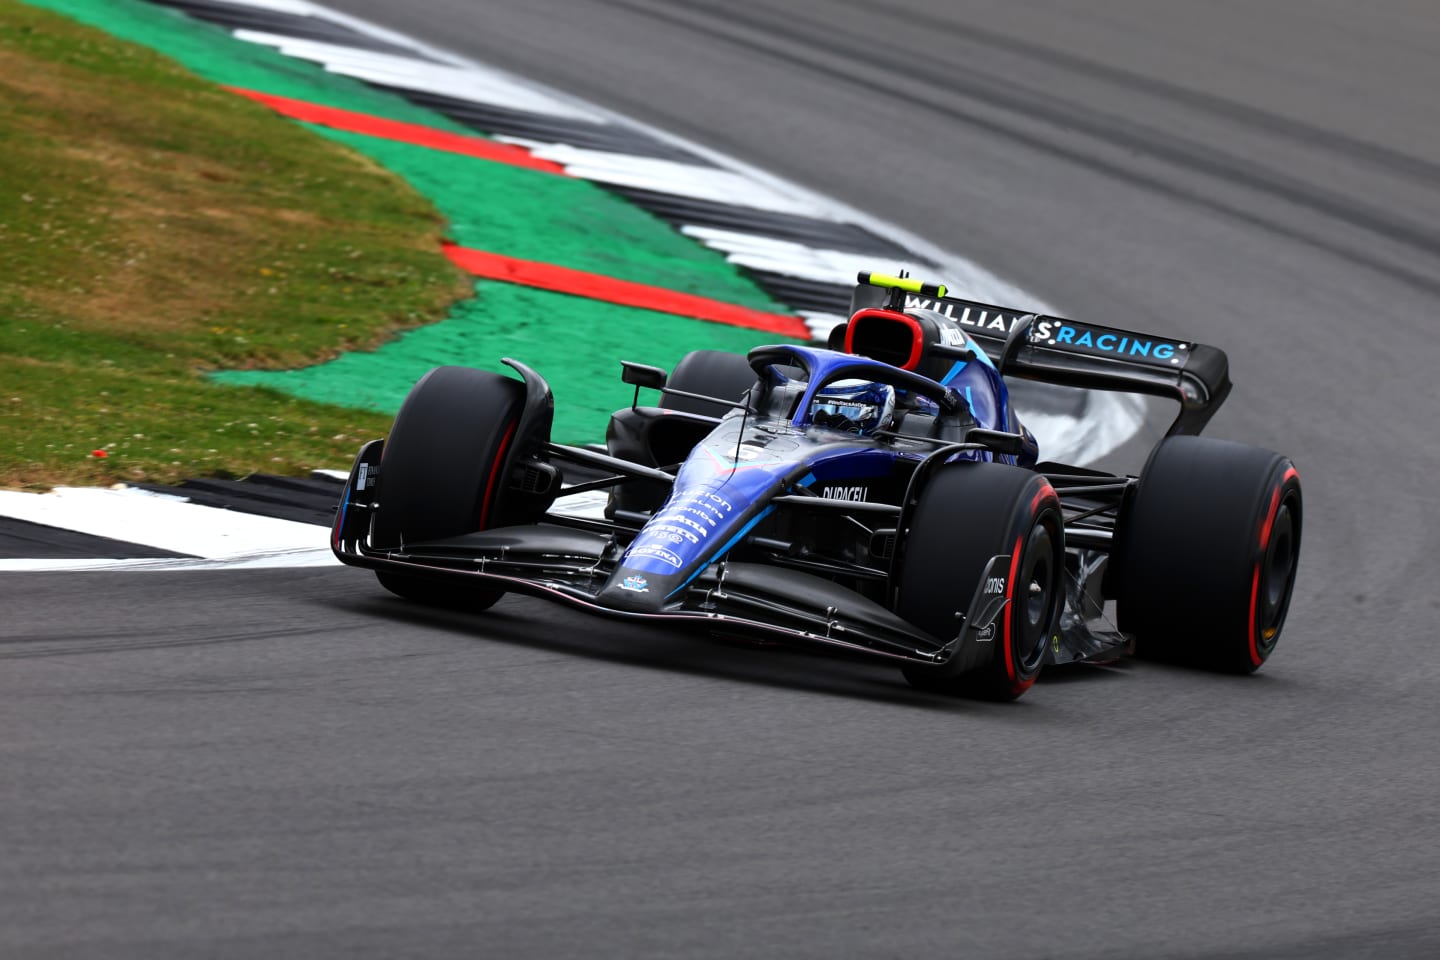 NORTHAMPTON, ENGLAND - JULY 02: Nicholas Latifi of Canada driving the (6) Williams FW44 Mercedes on track during final practice ahead of the F1 Grand Prix of Great Britain at Silverstone on July 02, 2022 in Northampton, England. (Photo by Mark Thompson/Getty Images)